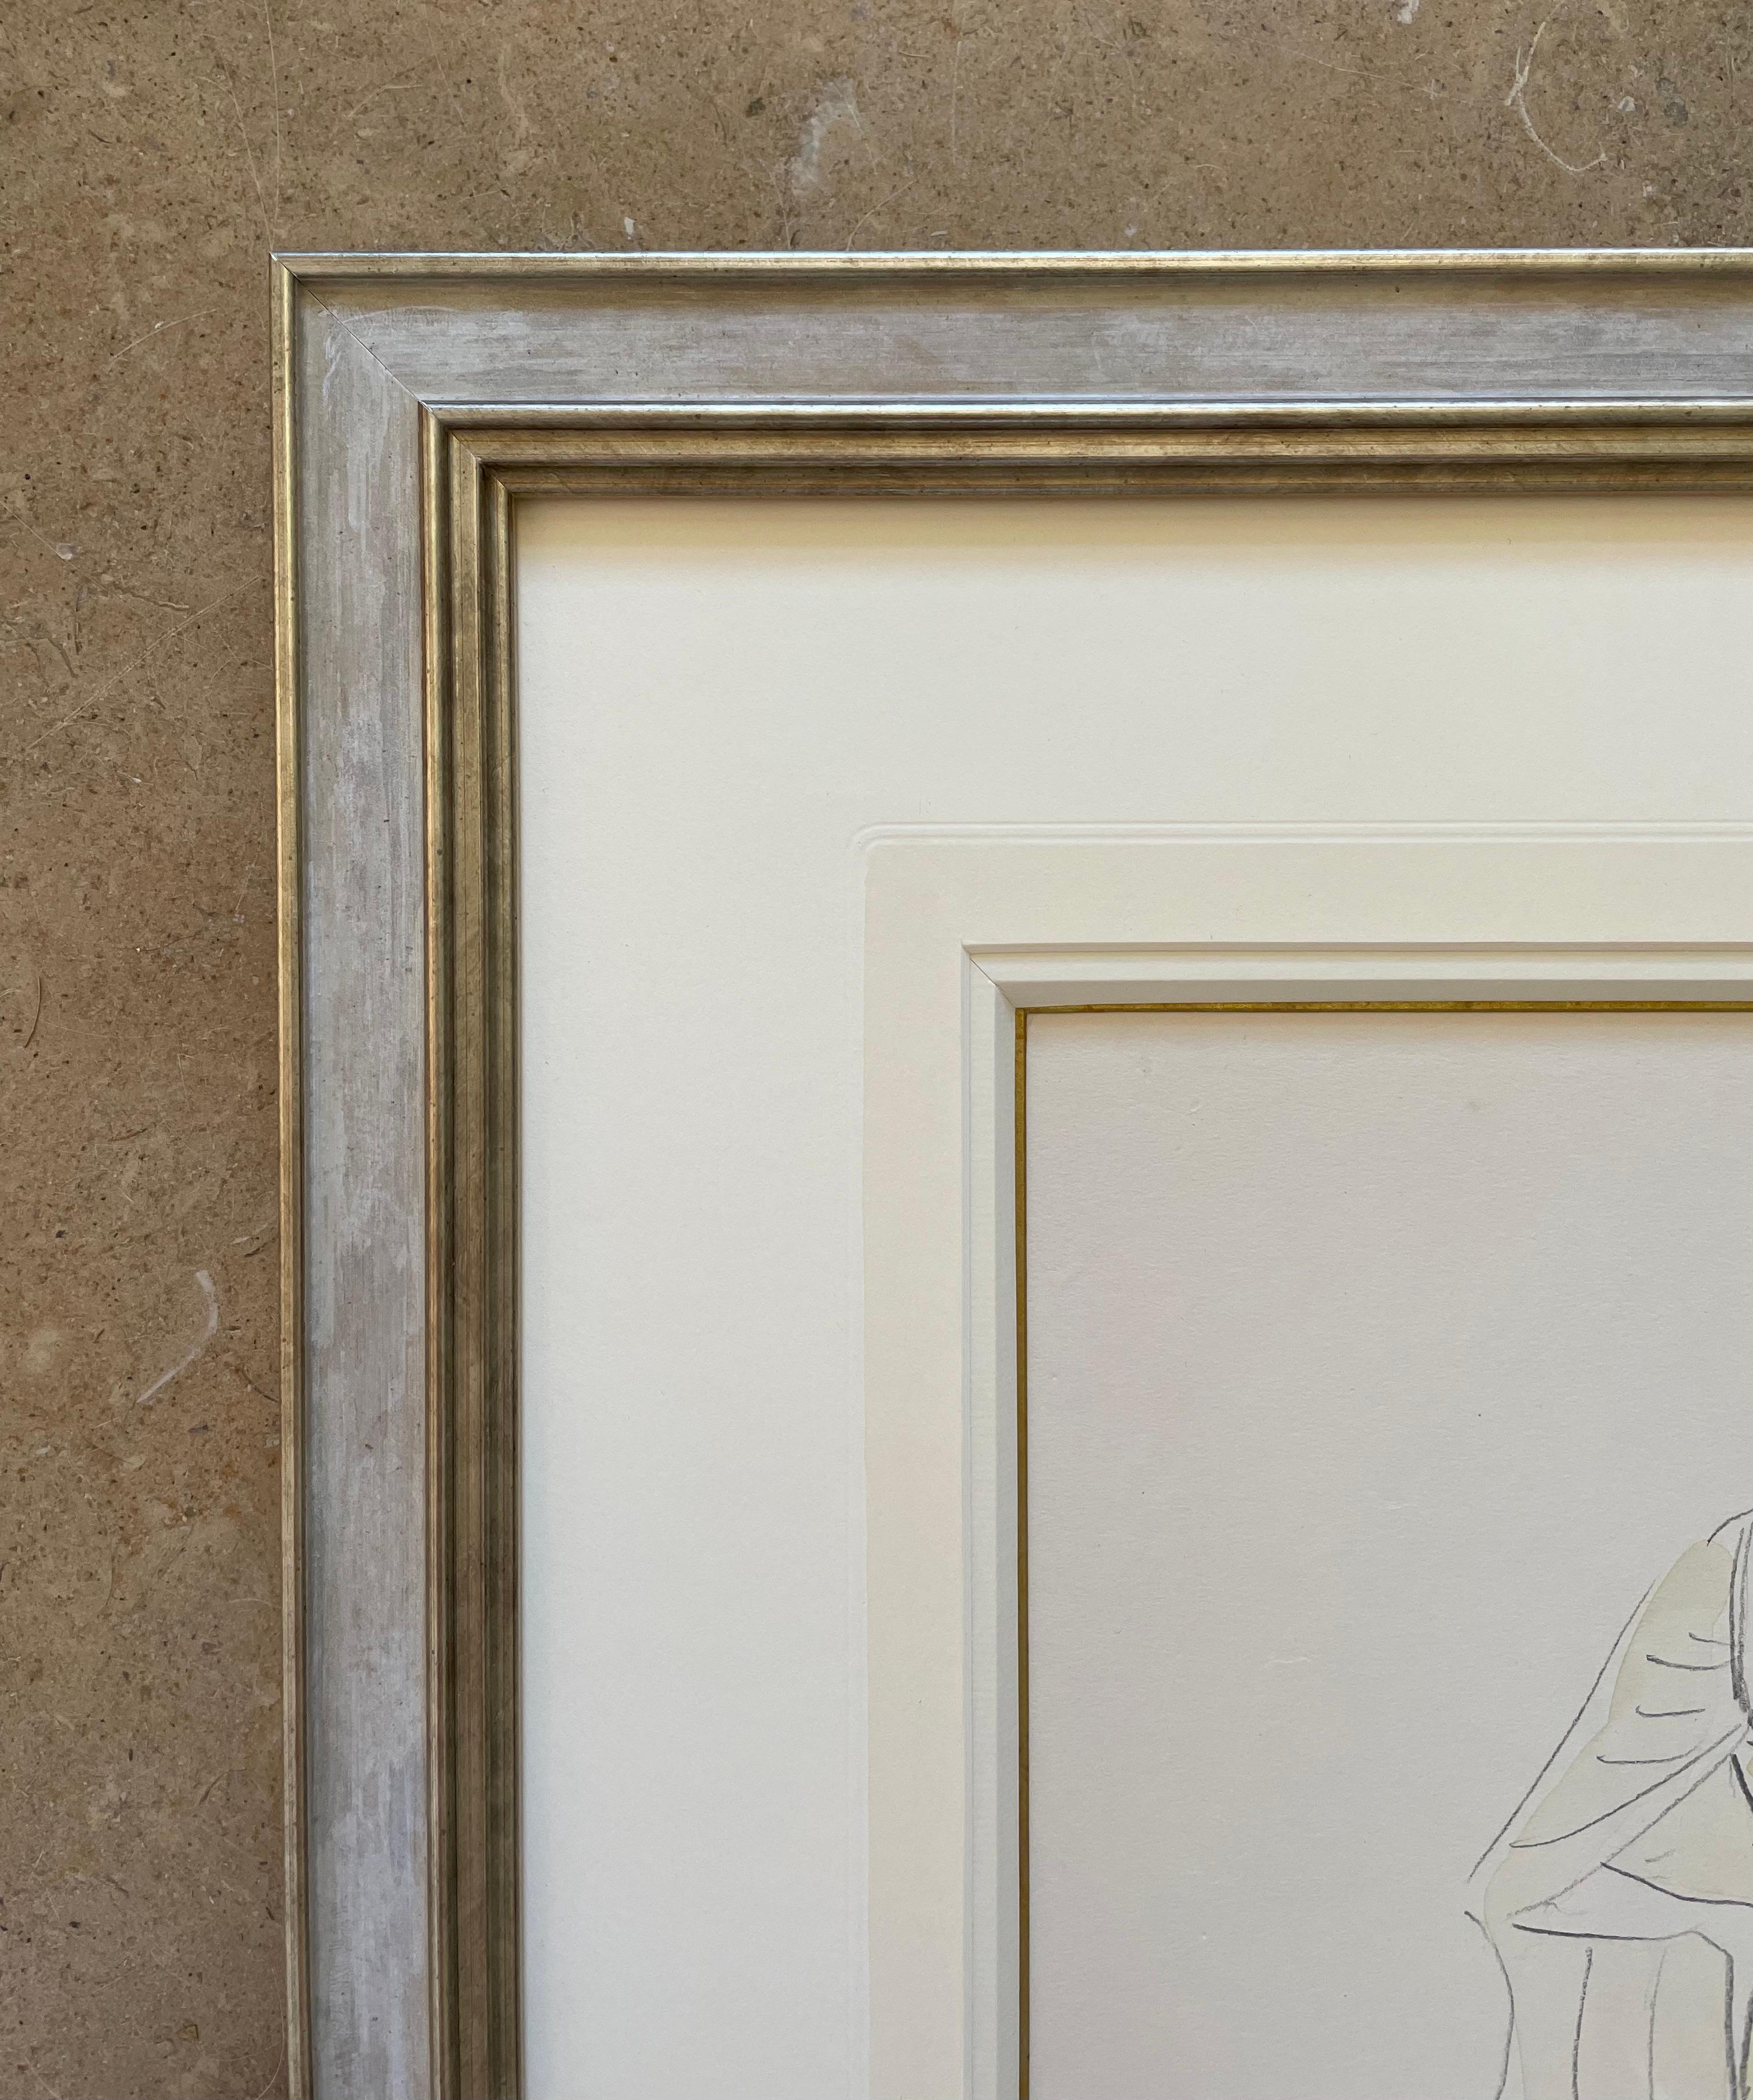 cecil beaton drawings for sale